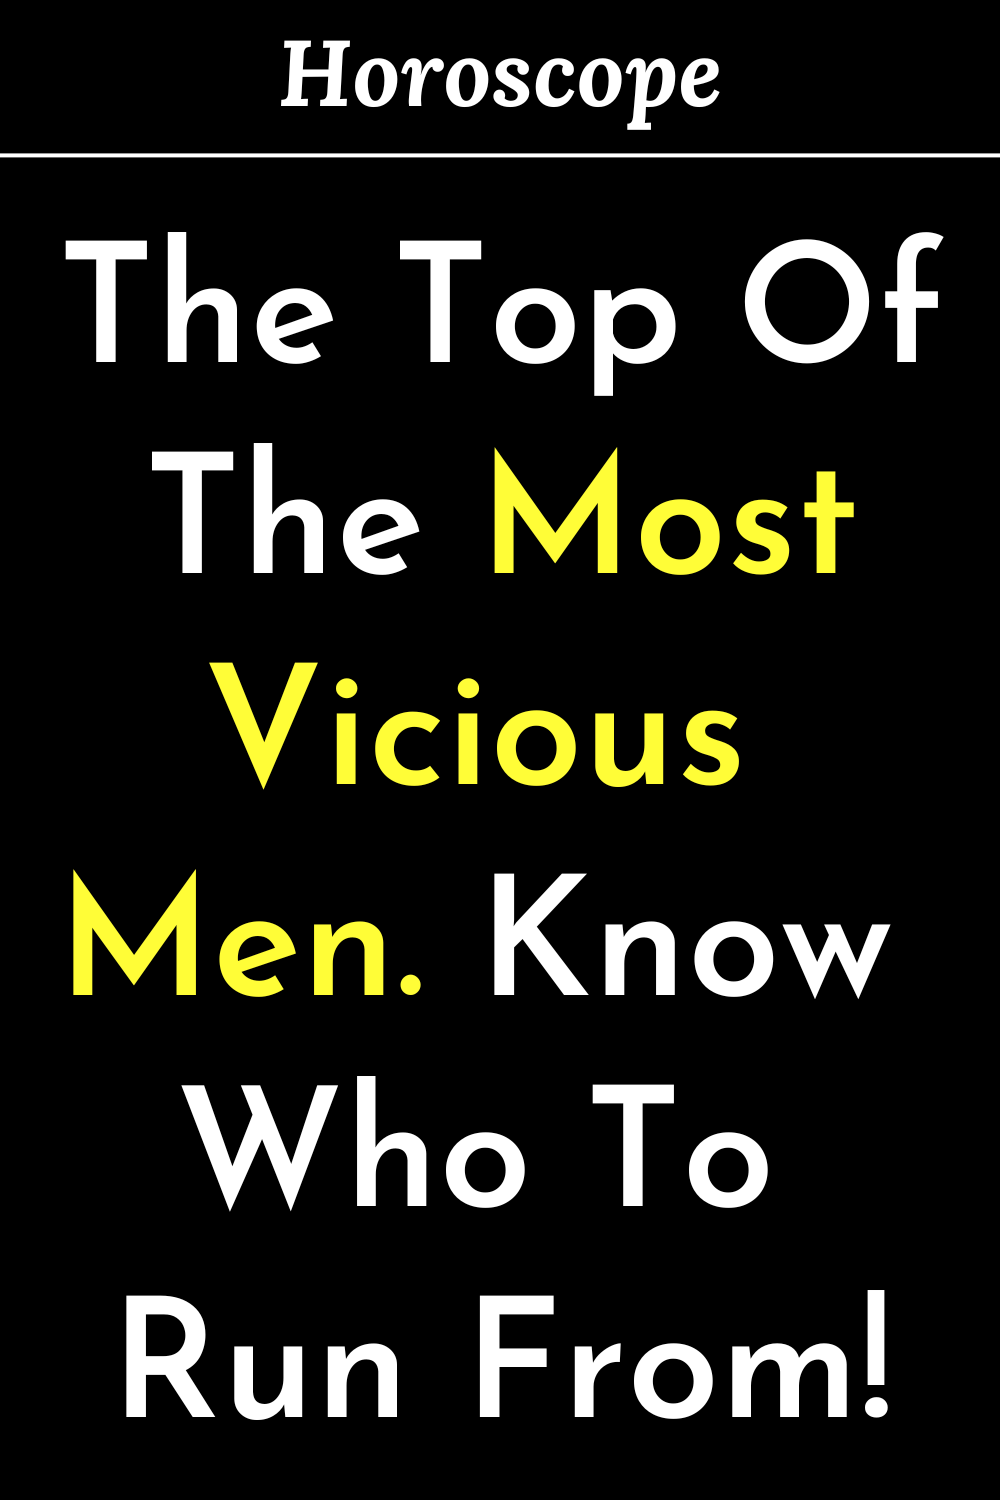 The Top Of The Most Vicious Men. Know Who To Run From!